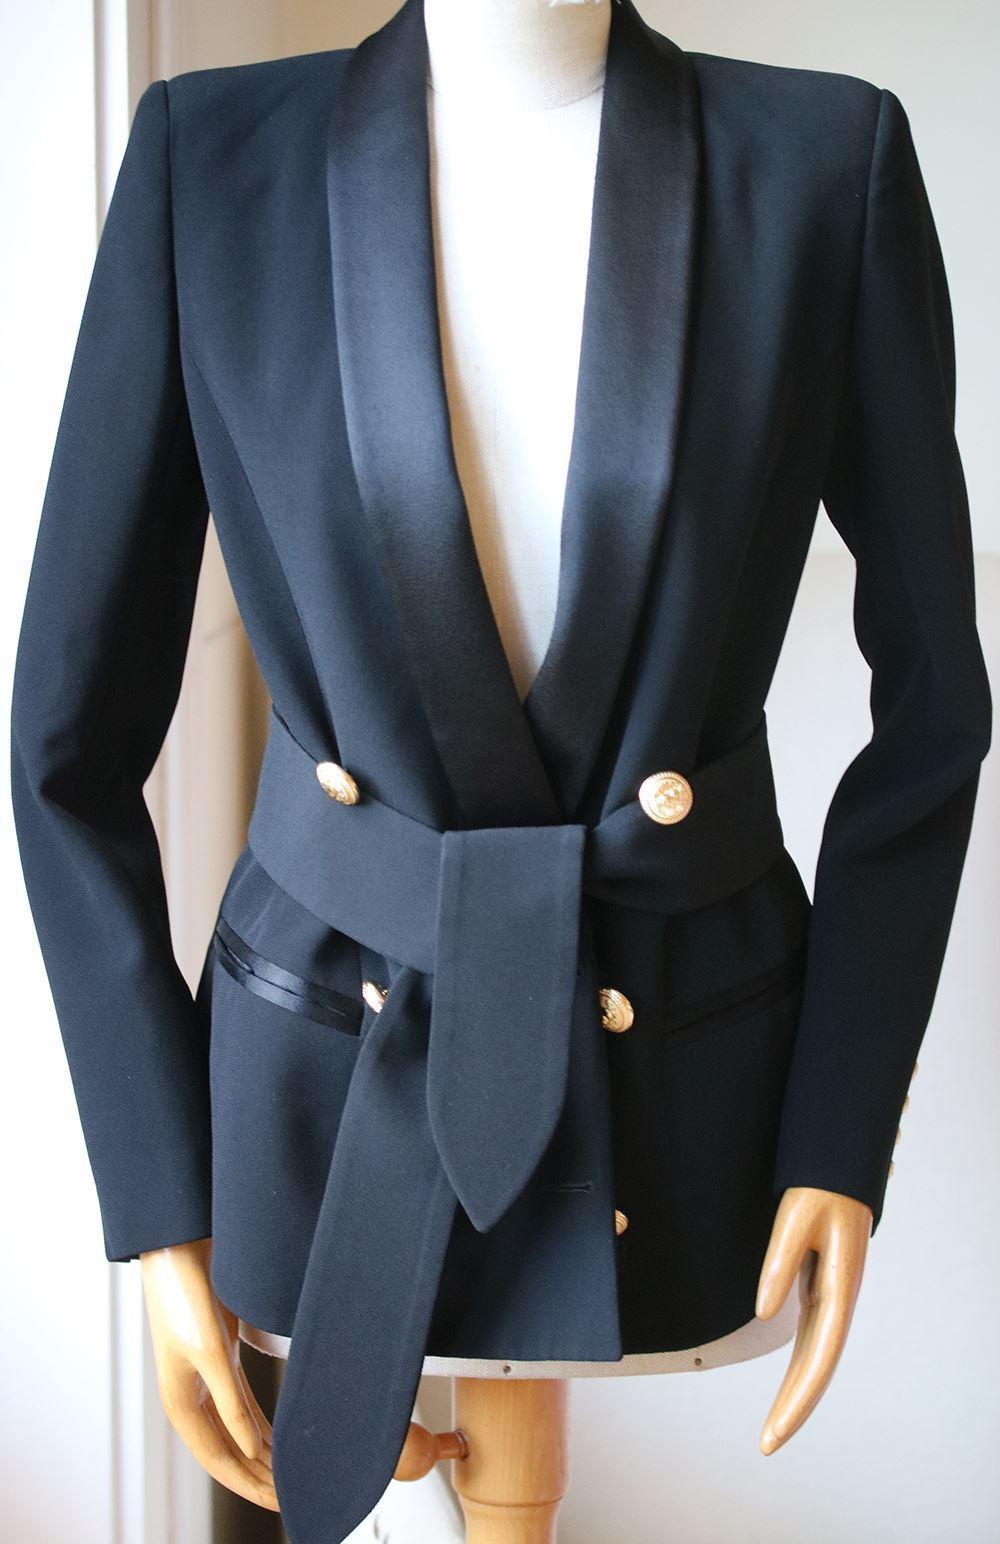 Balmain's tuxedo-style blazer is a prime example of Creative Director Olivier Rousteing's expert tailoring skills. Crafted in Italy from structured crepe in a deep black shade, this double-breasted style is decorated with the brand's iconic